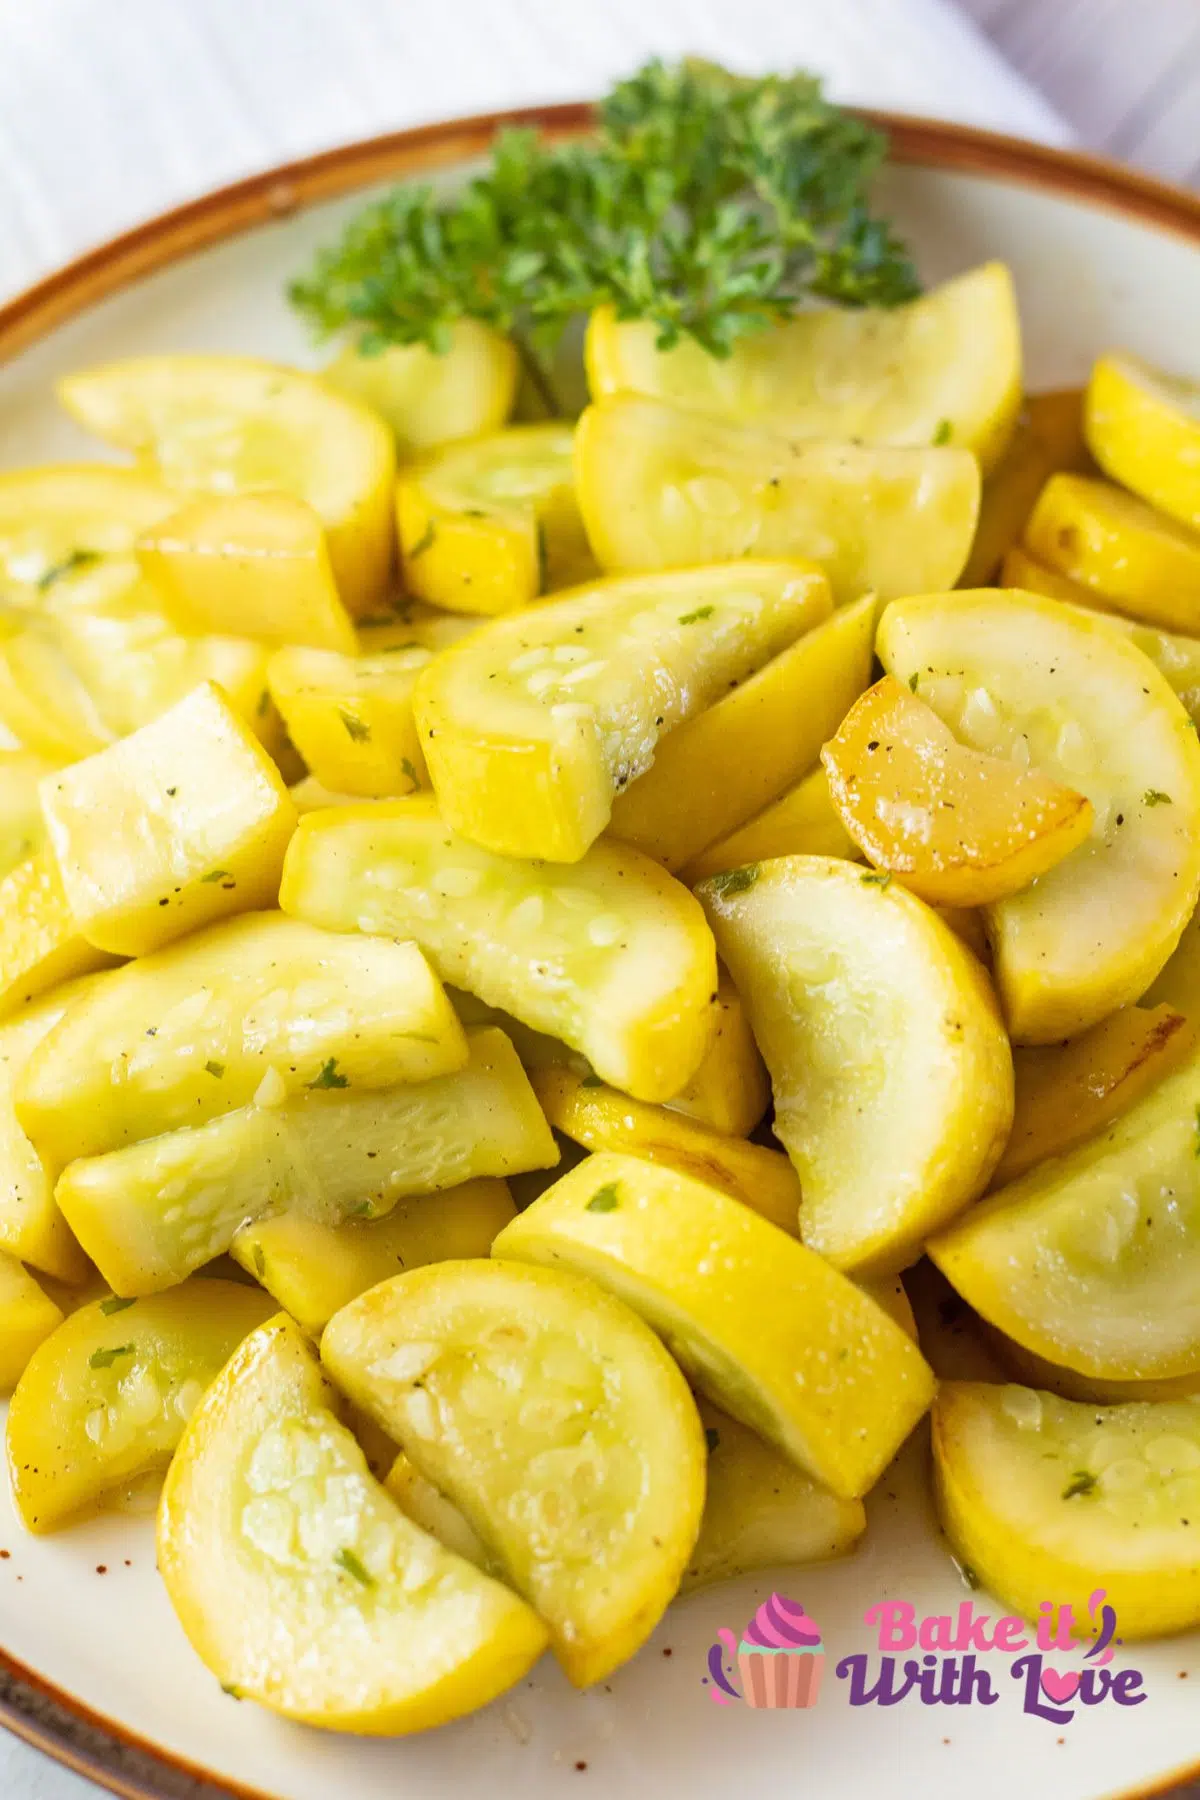 Tall image of a plate with sauteed yellow squash.